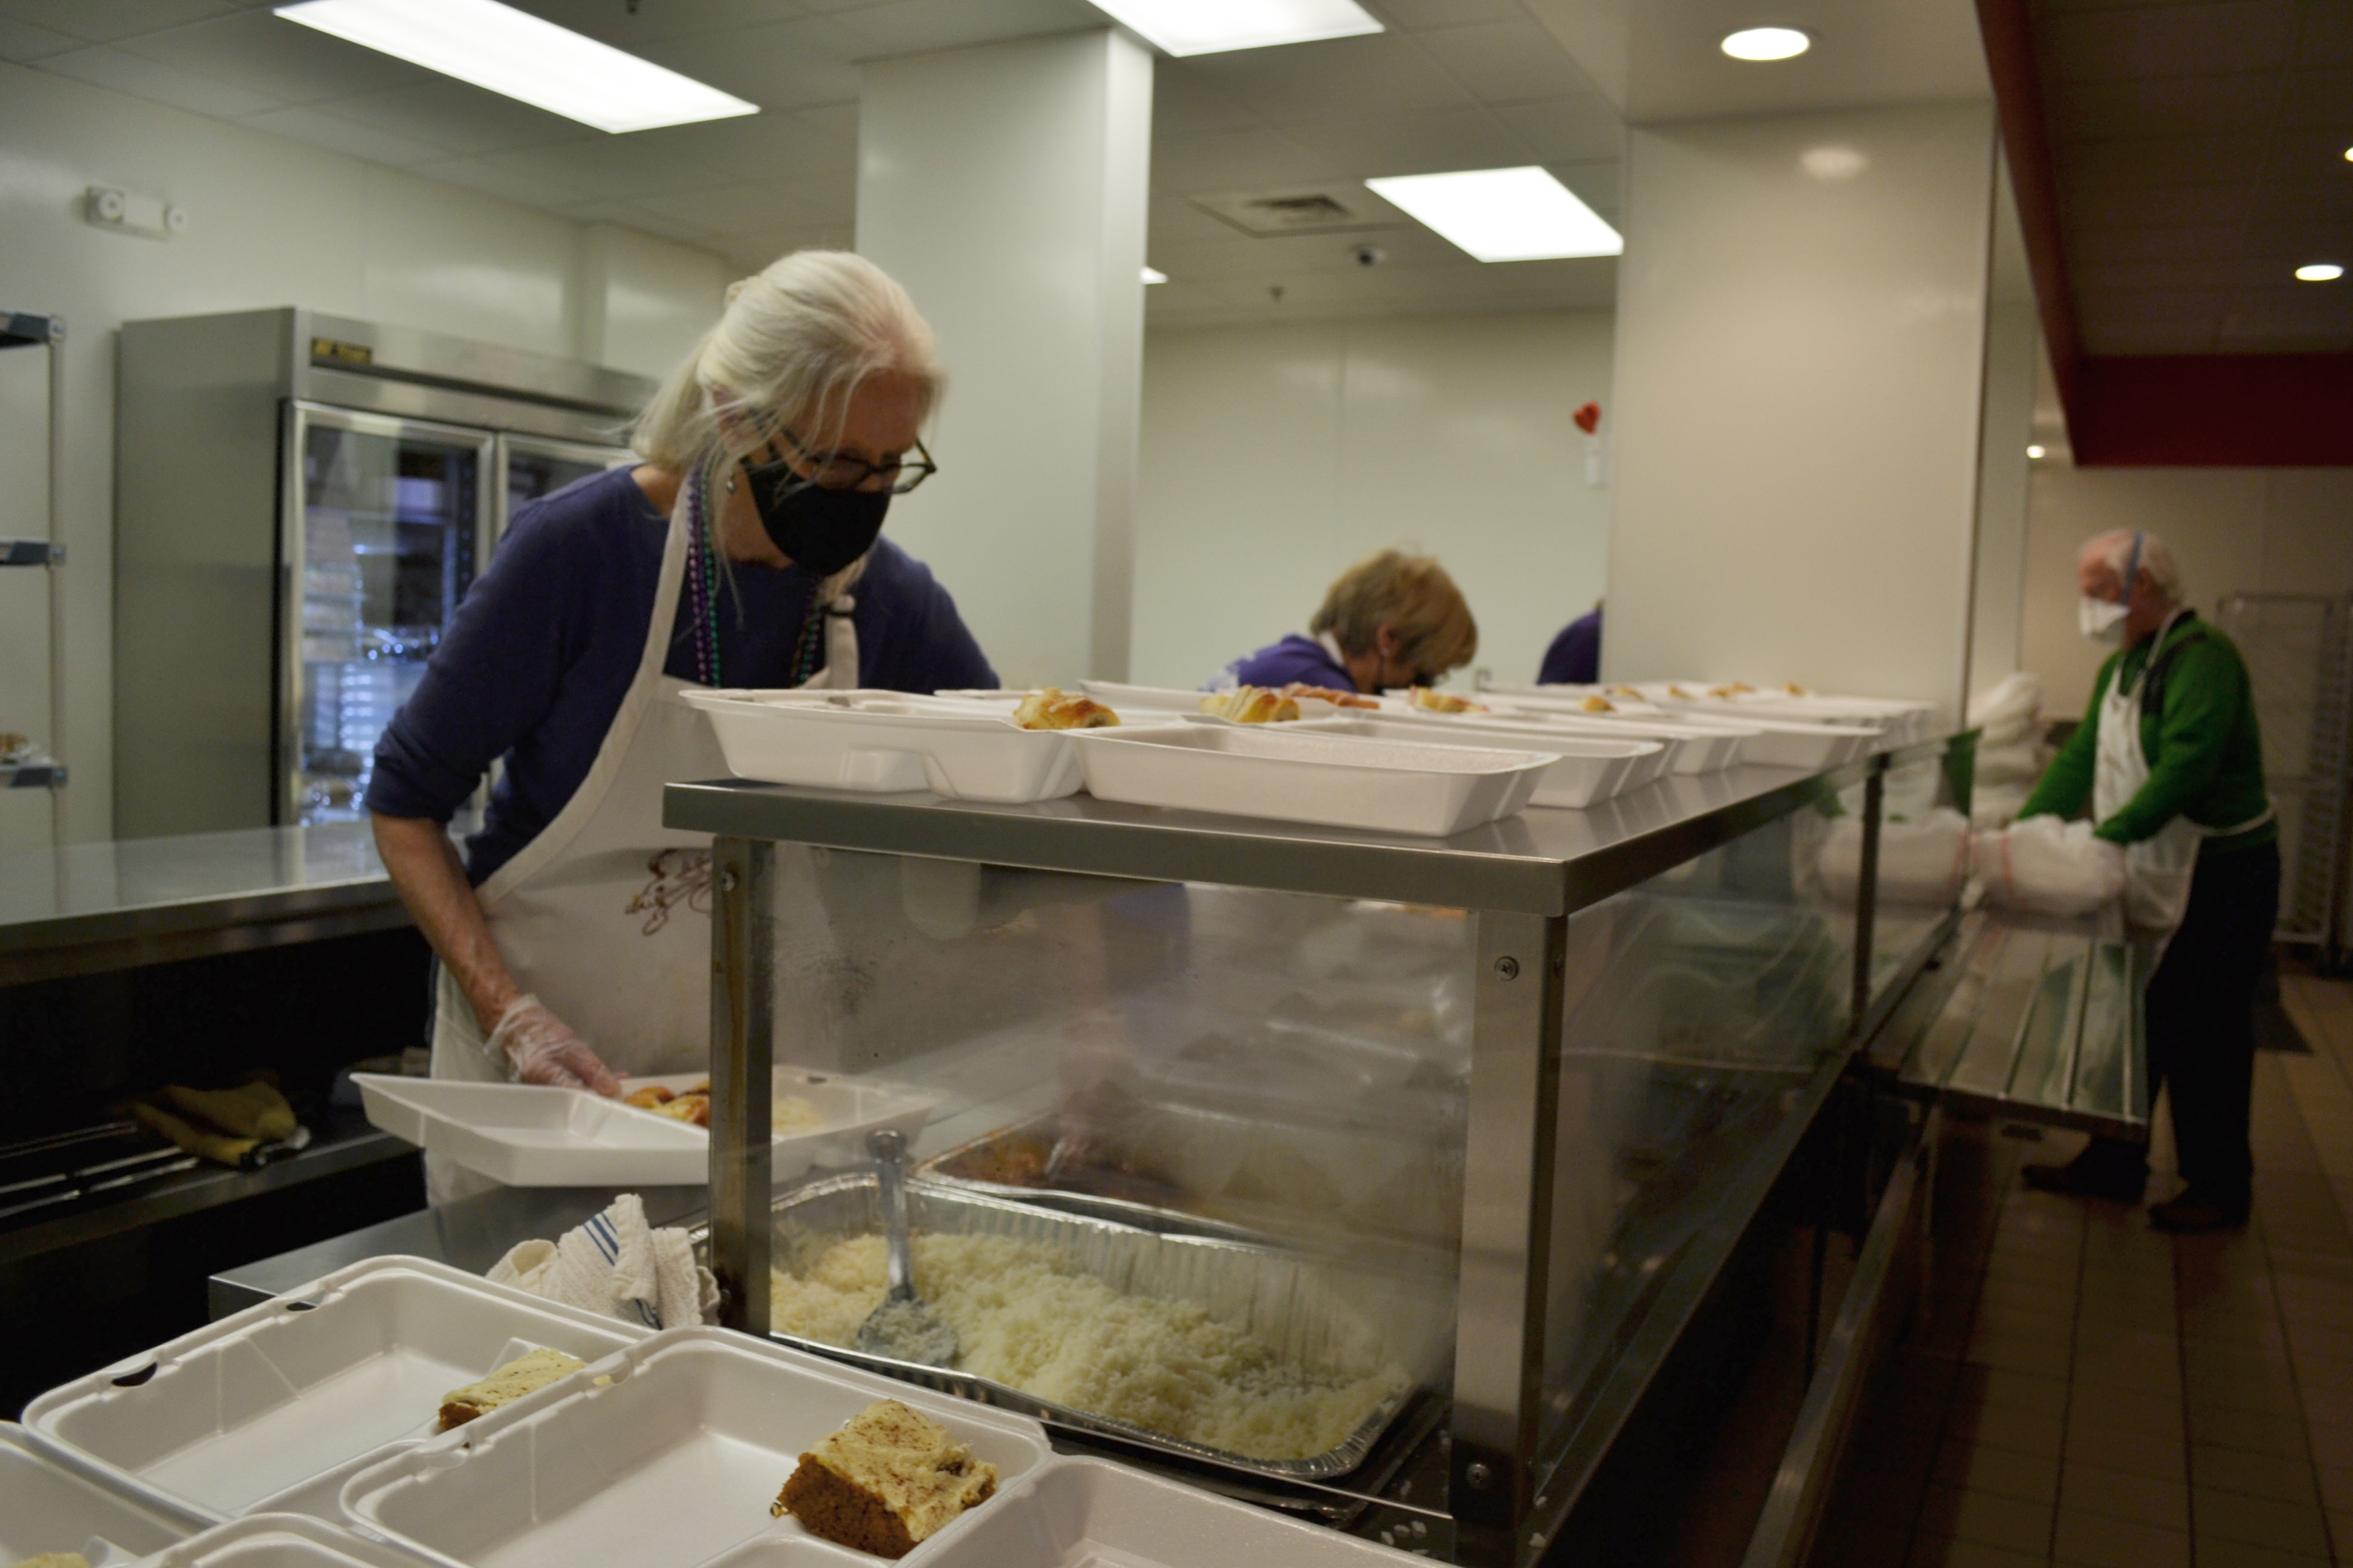 Volunteers are masked and serving up portions into white clamshell containers for to go meals. Photo by Alyssa Buckley.